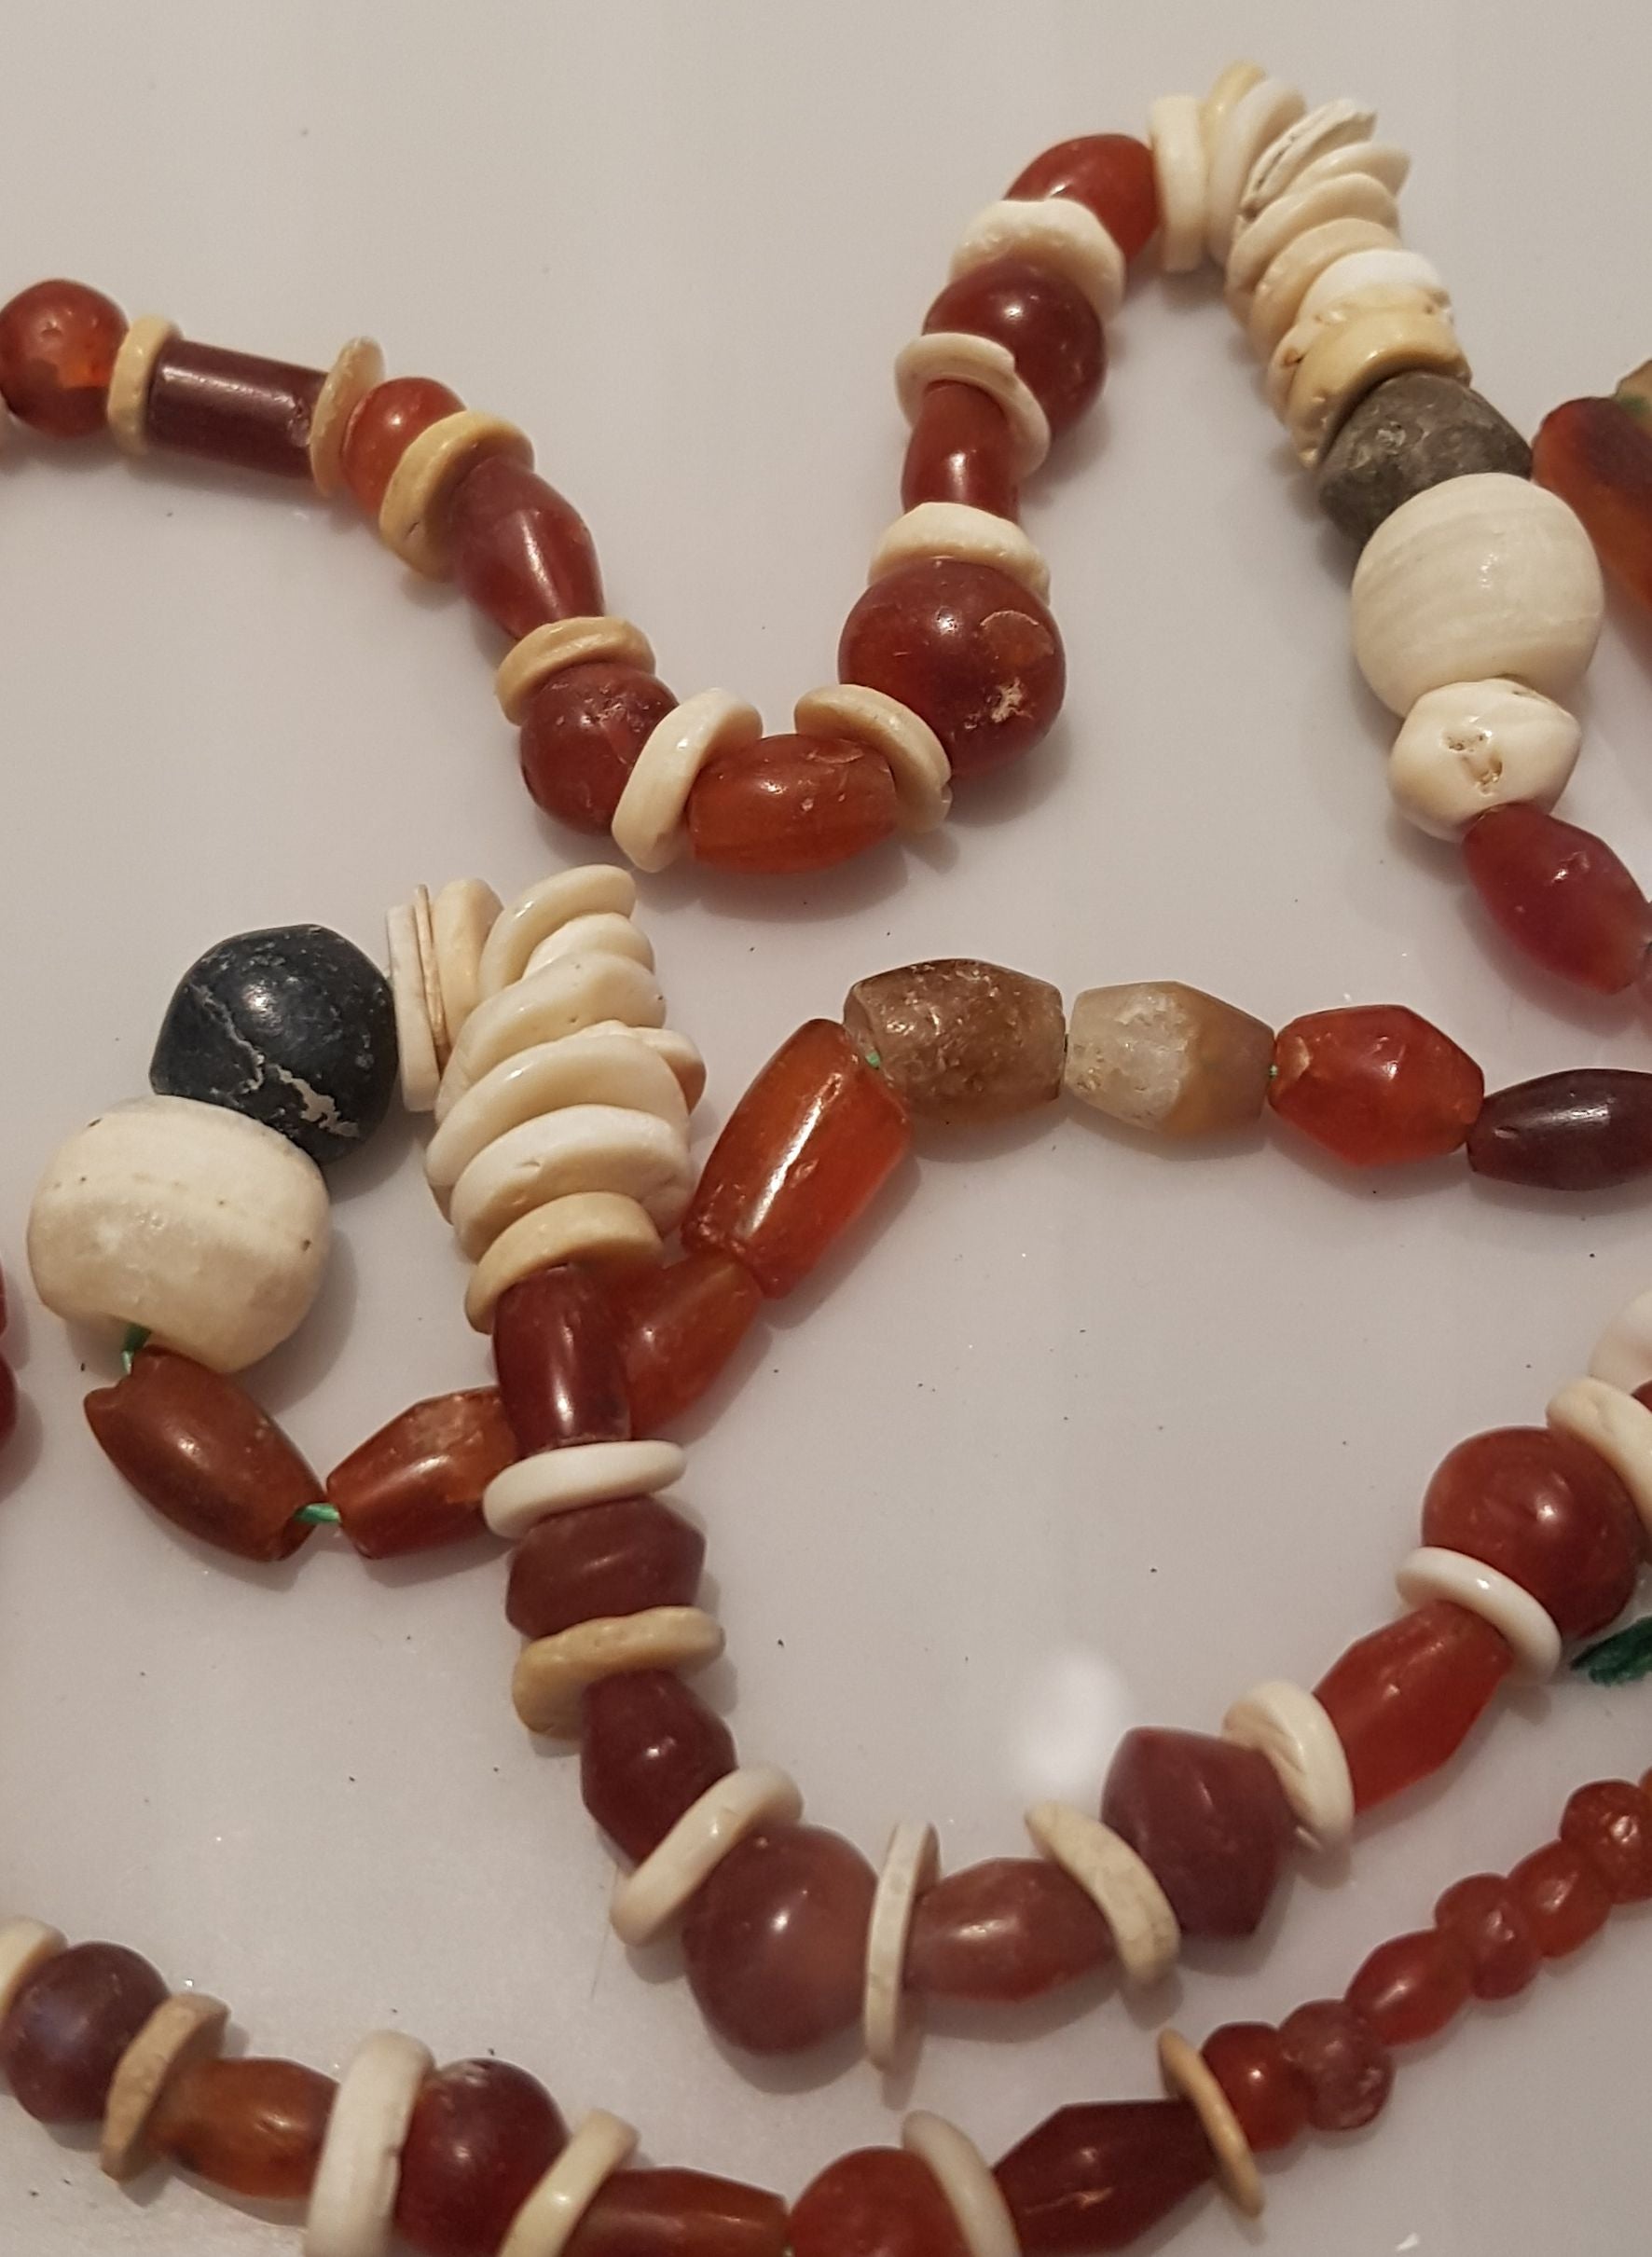 A necklace of carnelian and other materials, including bone, found at Saruq Al Hadid.